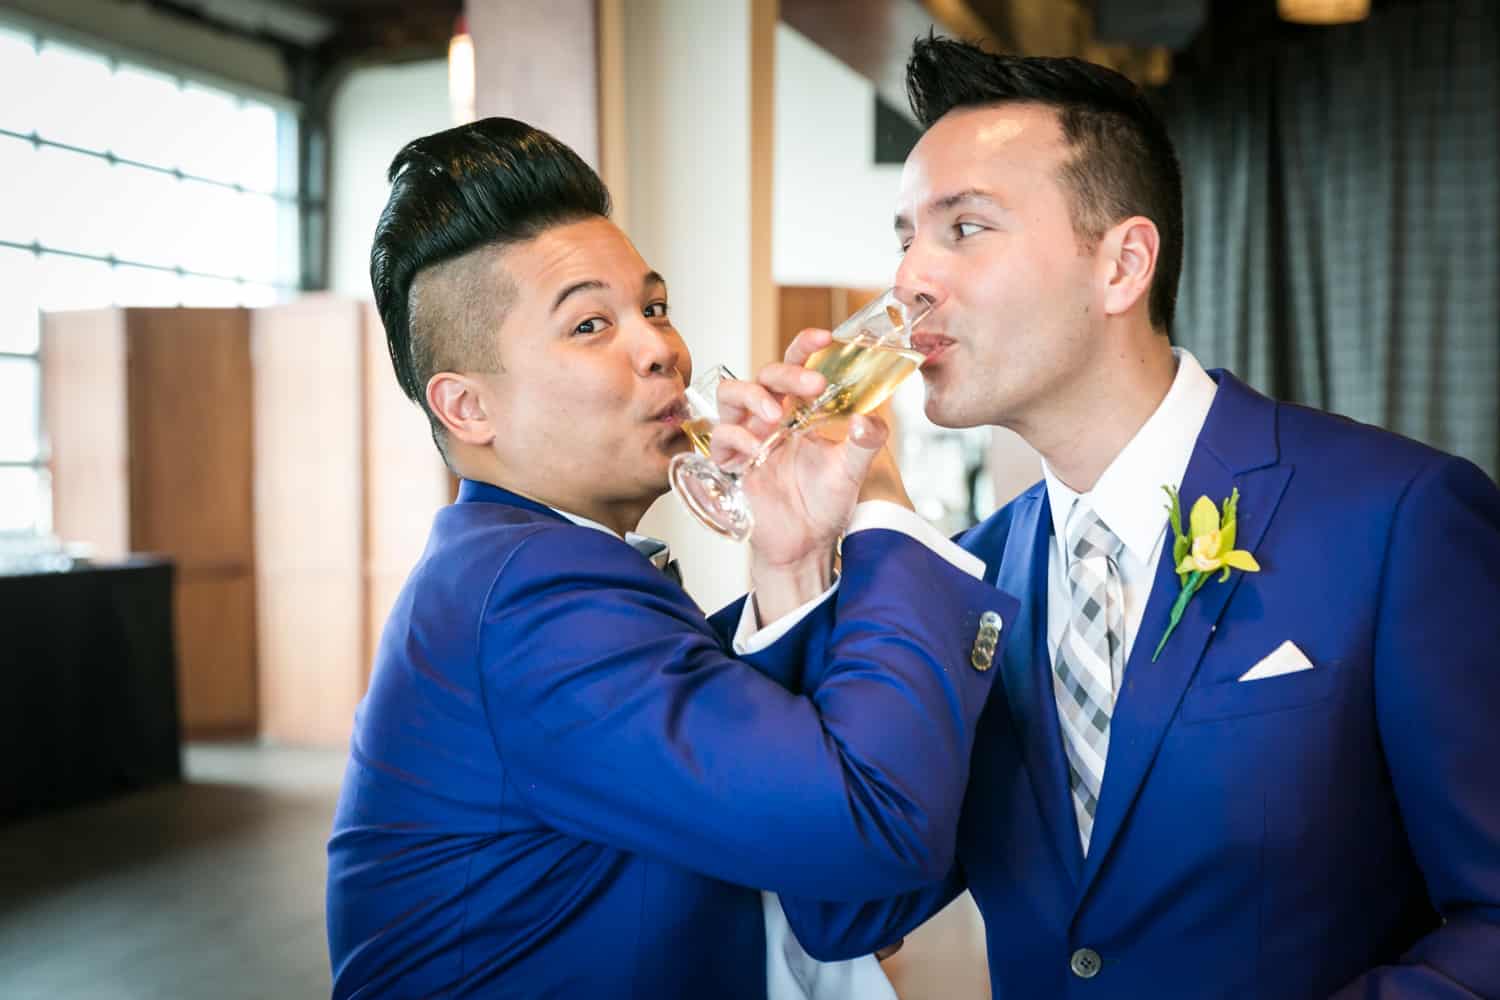 Two grooms drinking champagne through entwined arms